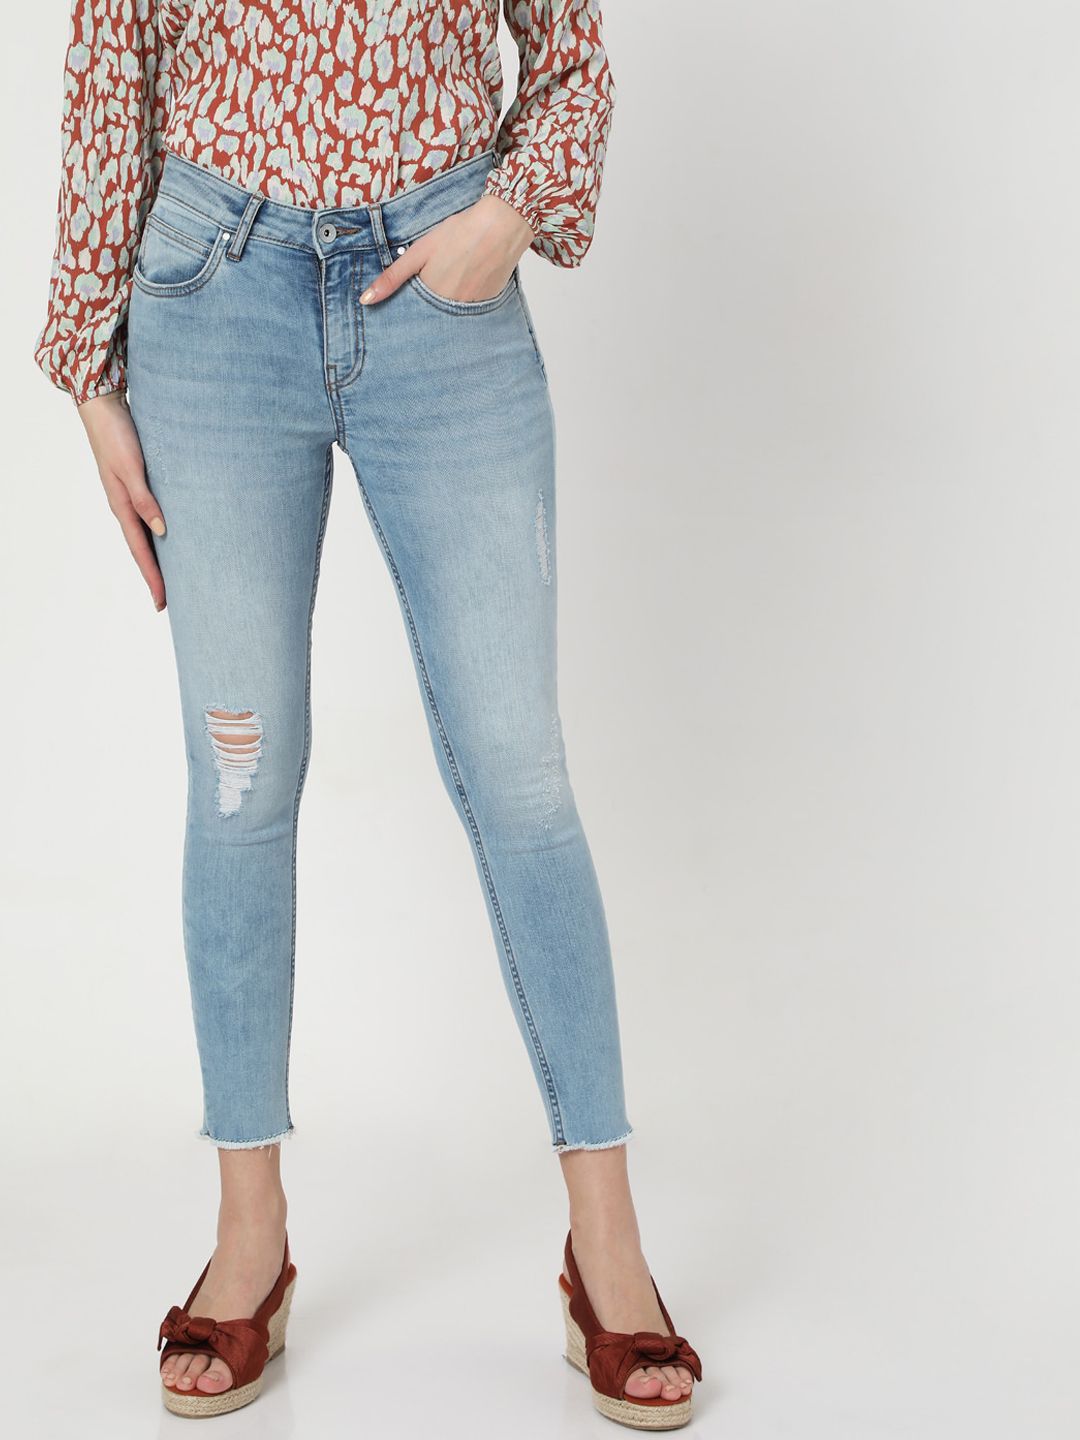 Vero Moda Women Blue Skinny Fit Mildly Distressed Light Fade Stretchable Jeans Price in India